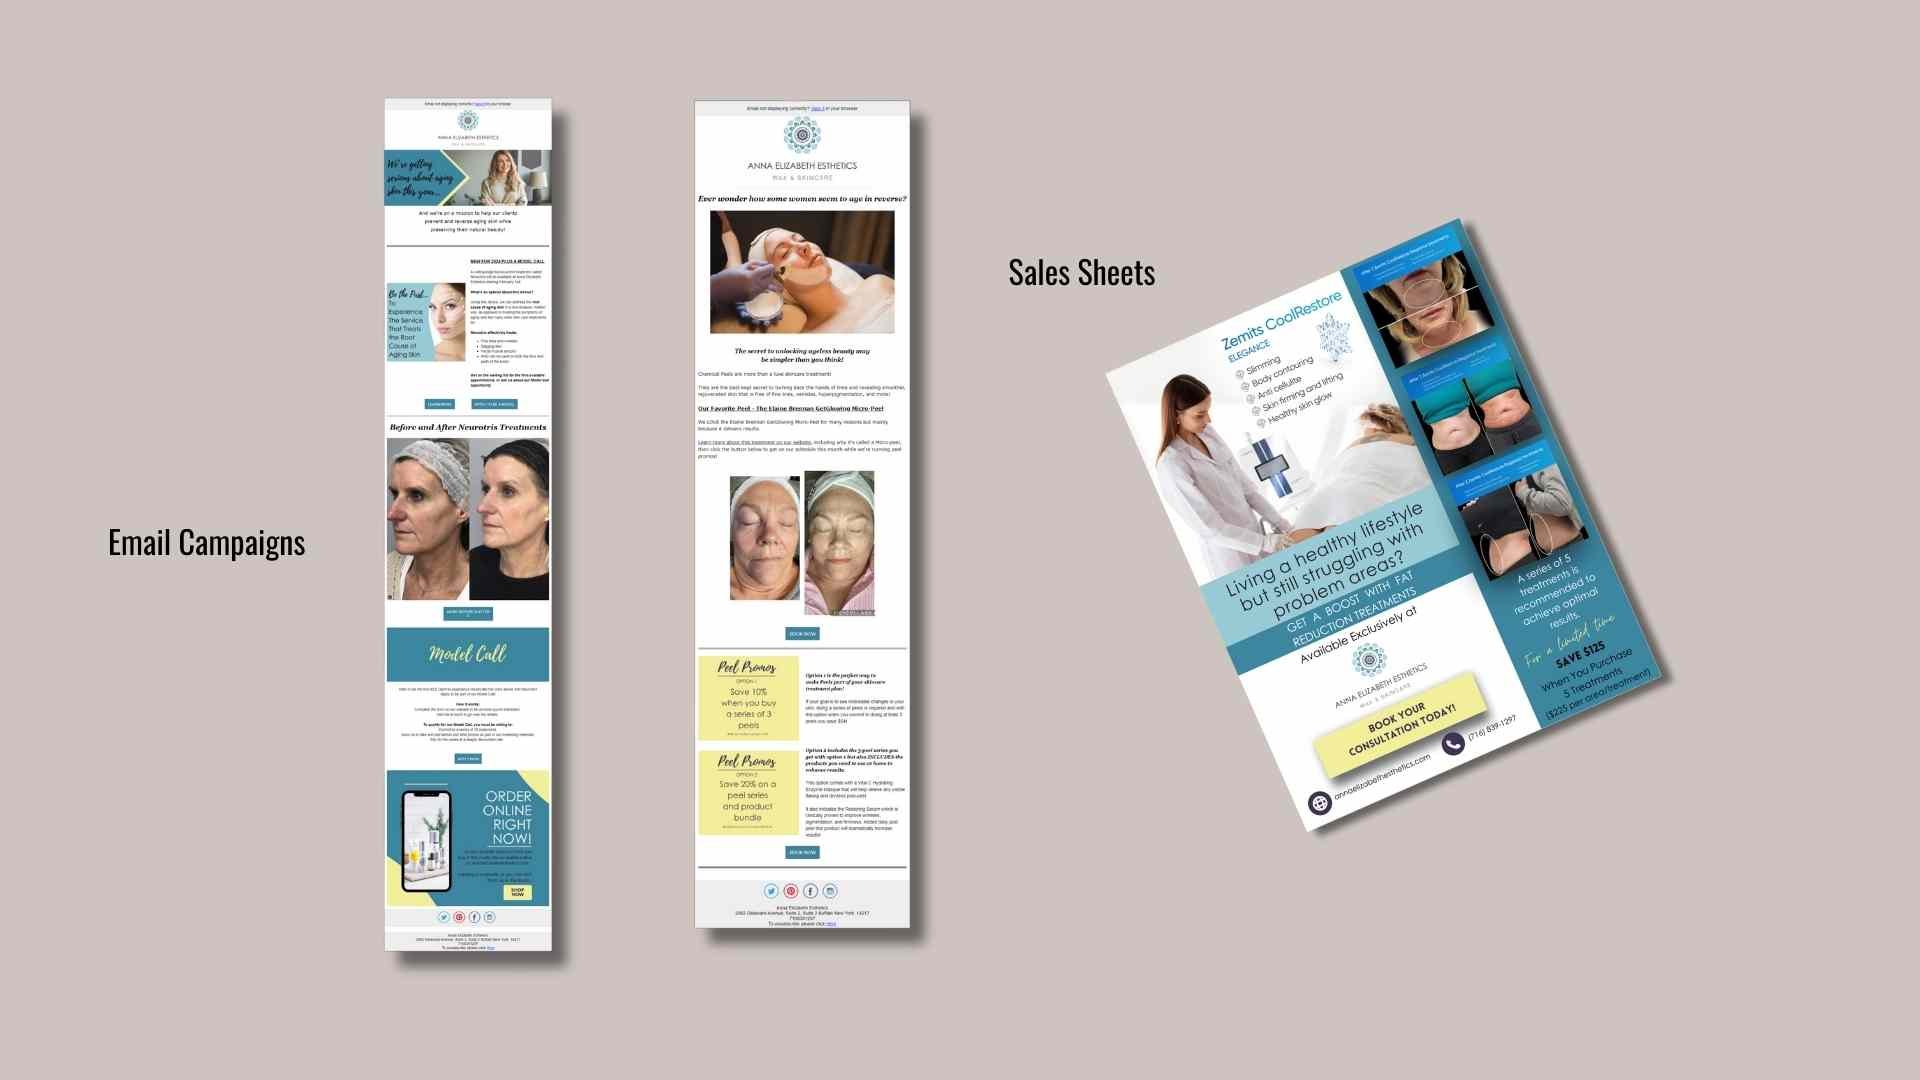 Examples of email newsletter created for Anna Elizabeth Esthetics